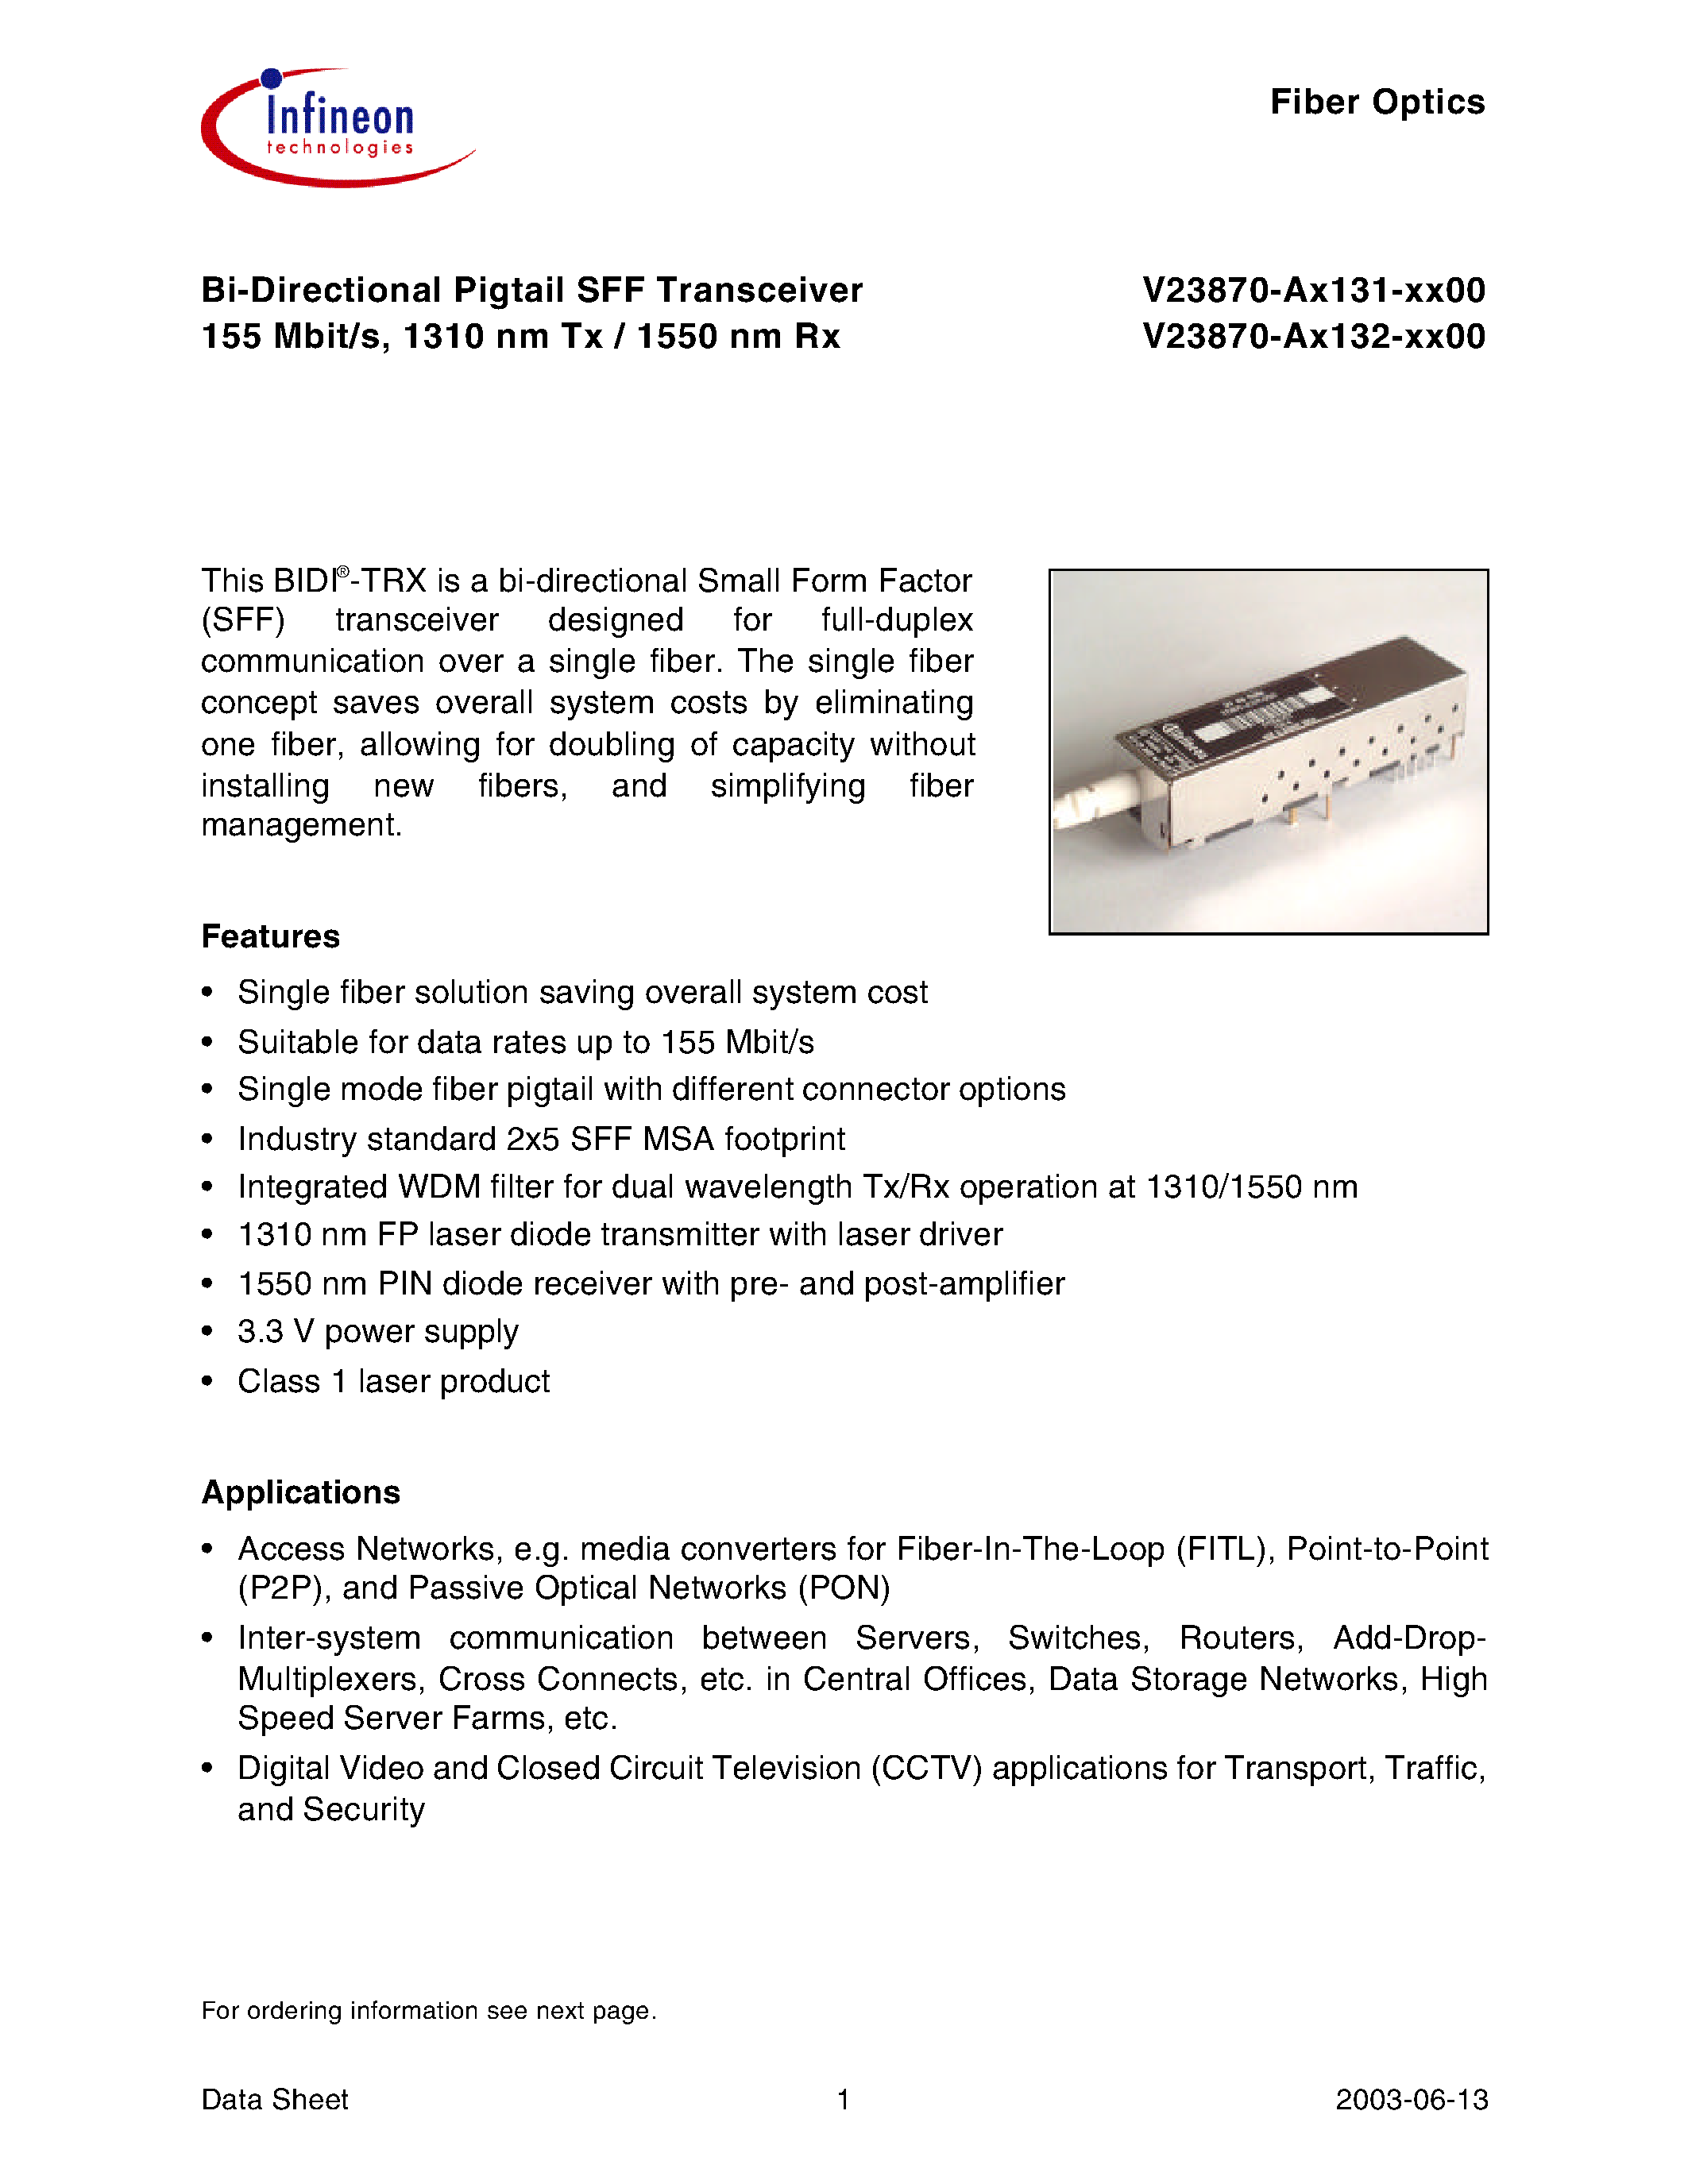 Datasheet V23870-A3132-K100 - Bi-Directional Pigtail SFF Transceiver 155 Mbit/s/ 1310 nm Tx / 1550 nm Rx page 1